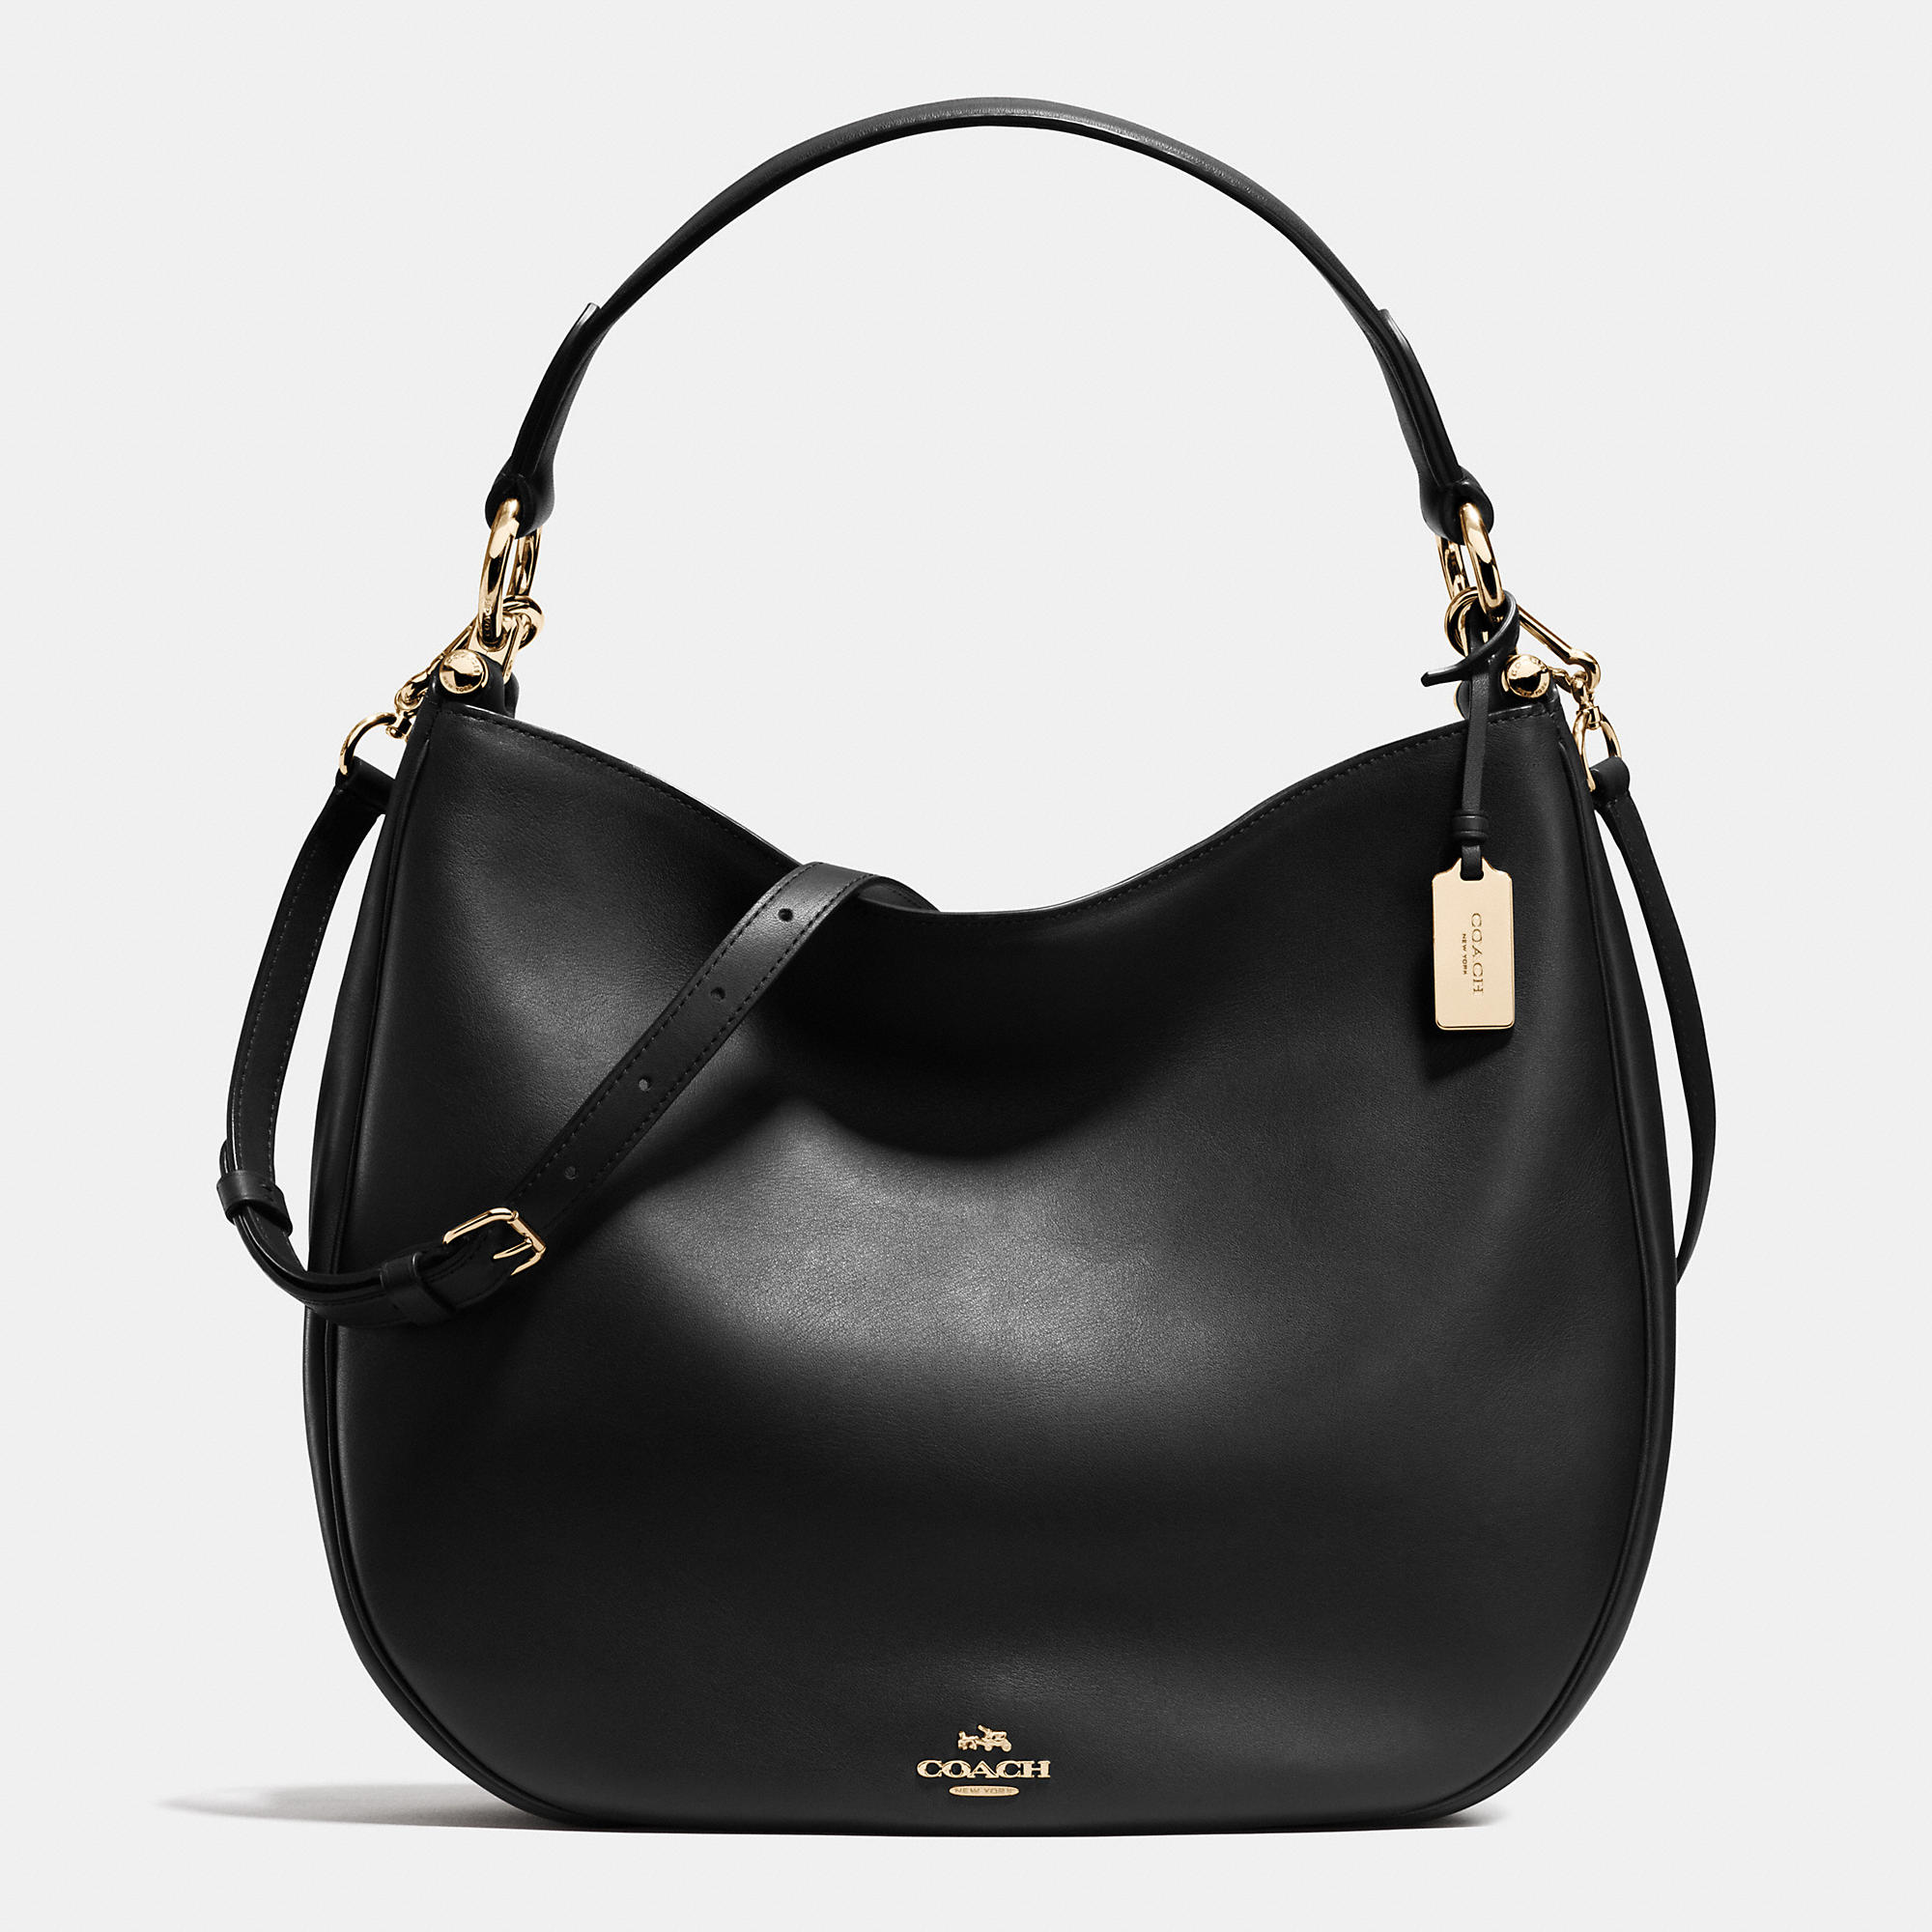 Luxury Brand Coach Nomad Hobo In Glovetanned Leather | Coach Outlet Canada